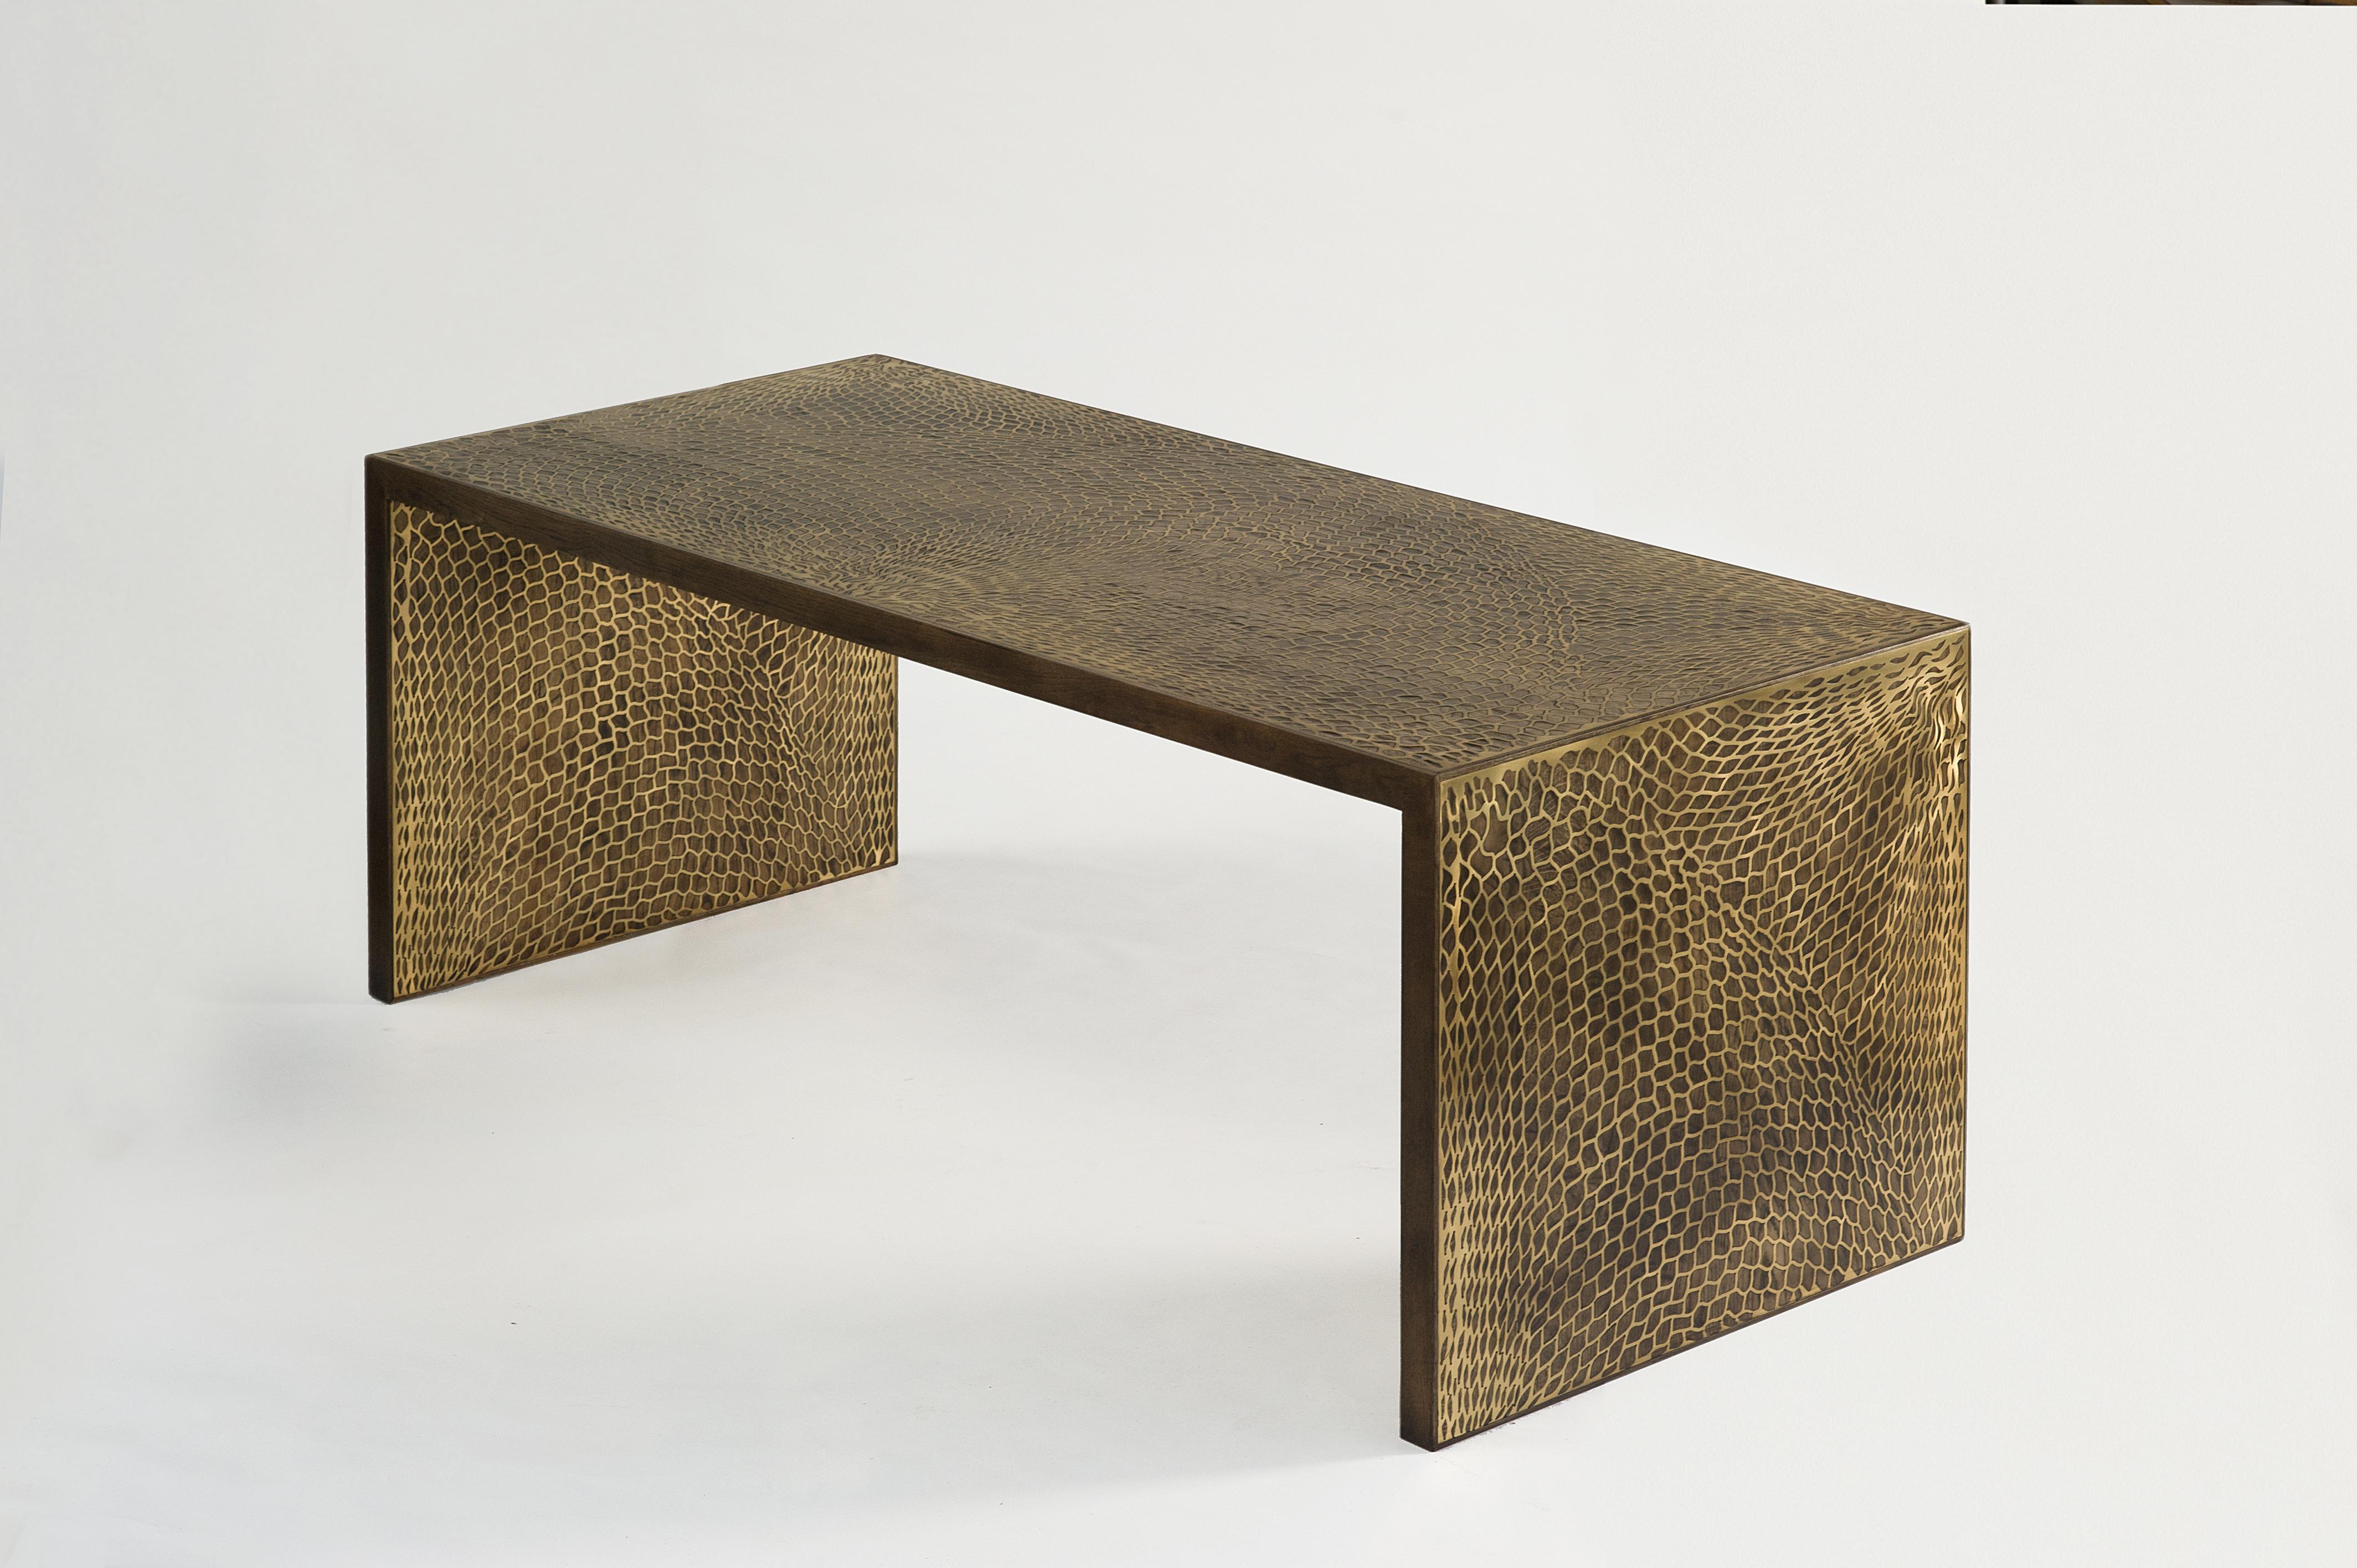 Brass on oak Trama coffee table sculpted by Francesco Perini
Materials: Oak, brass
Dimensions: H 77 x W 201 x D 86.5 cm

Following a creative path that grew out of the founding of a company, I Vassalletti, known the world over for its extraordinary